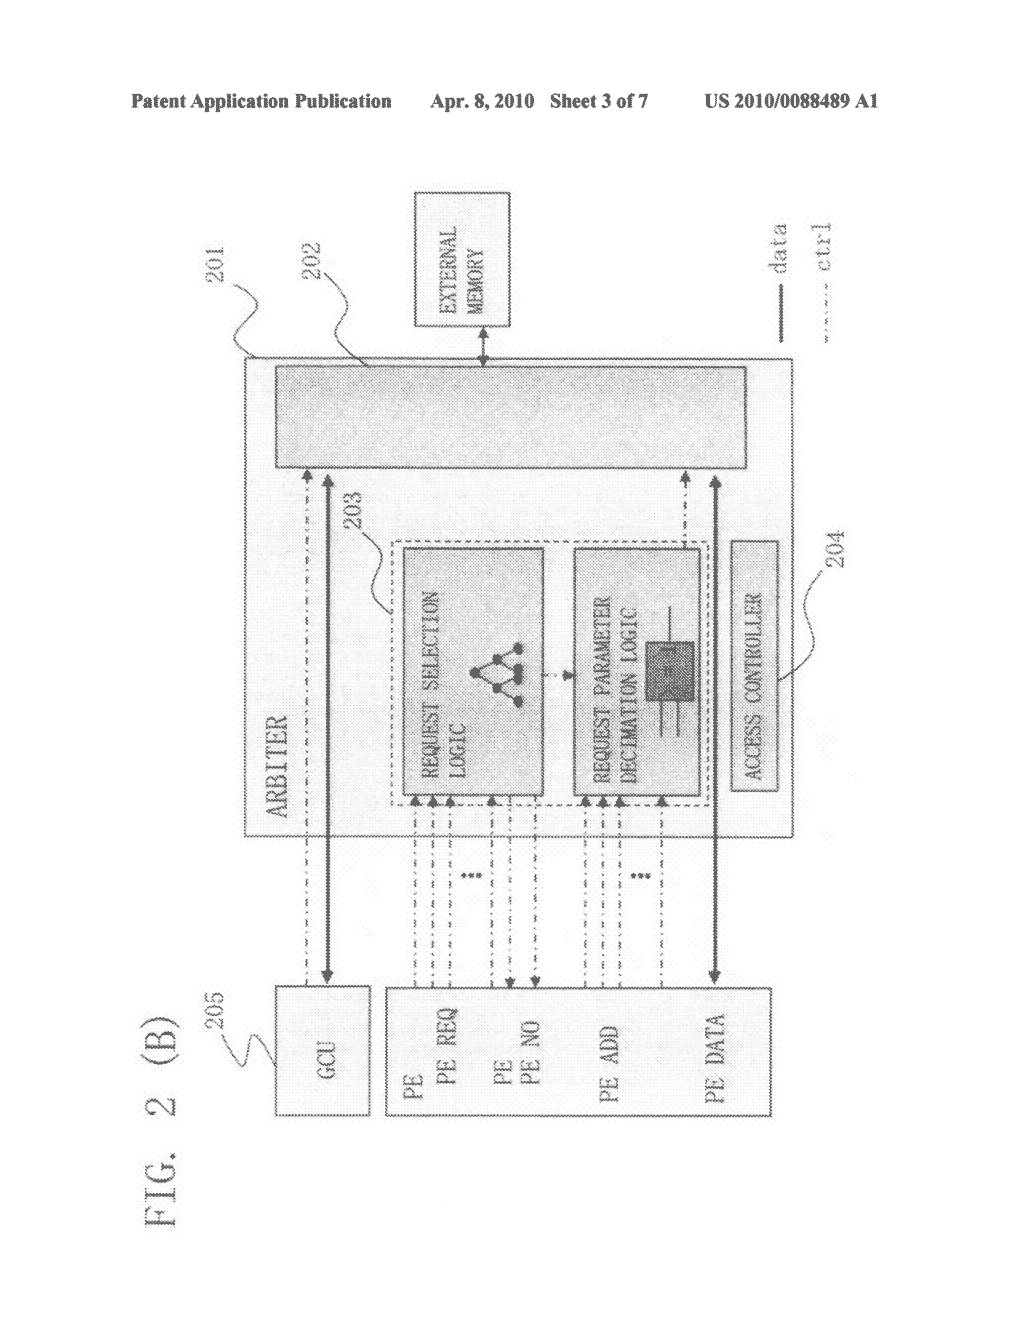  DATA TRANSFER NETWORK AND CONTROL APPARATUS FOR A SYSTEM WITH AN ARRAY OF PROCESSING ELEMENTS EACH EITHER SELF-OR COMMON CONTROLLED - diagram, schematic, and image 04